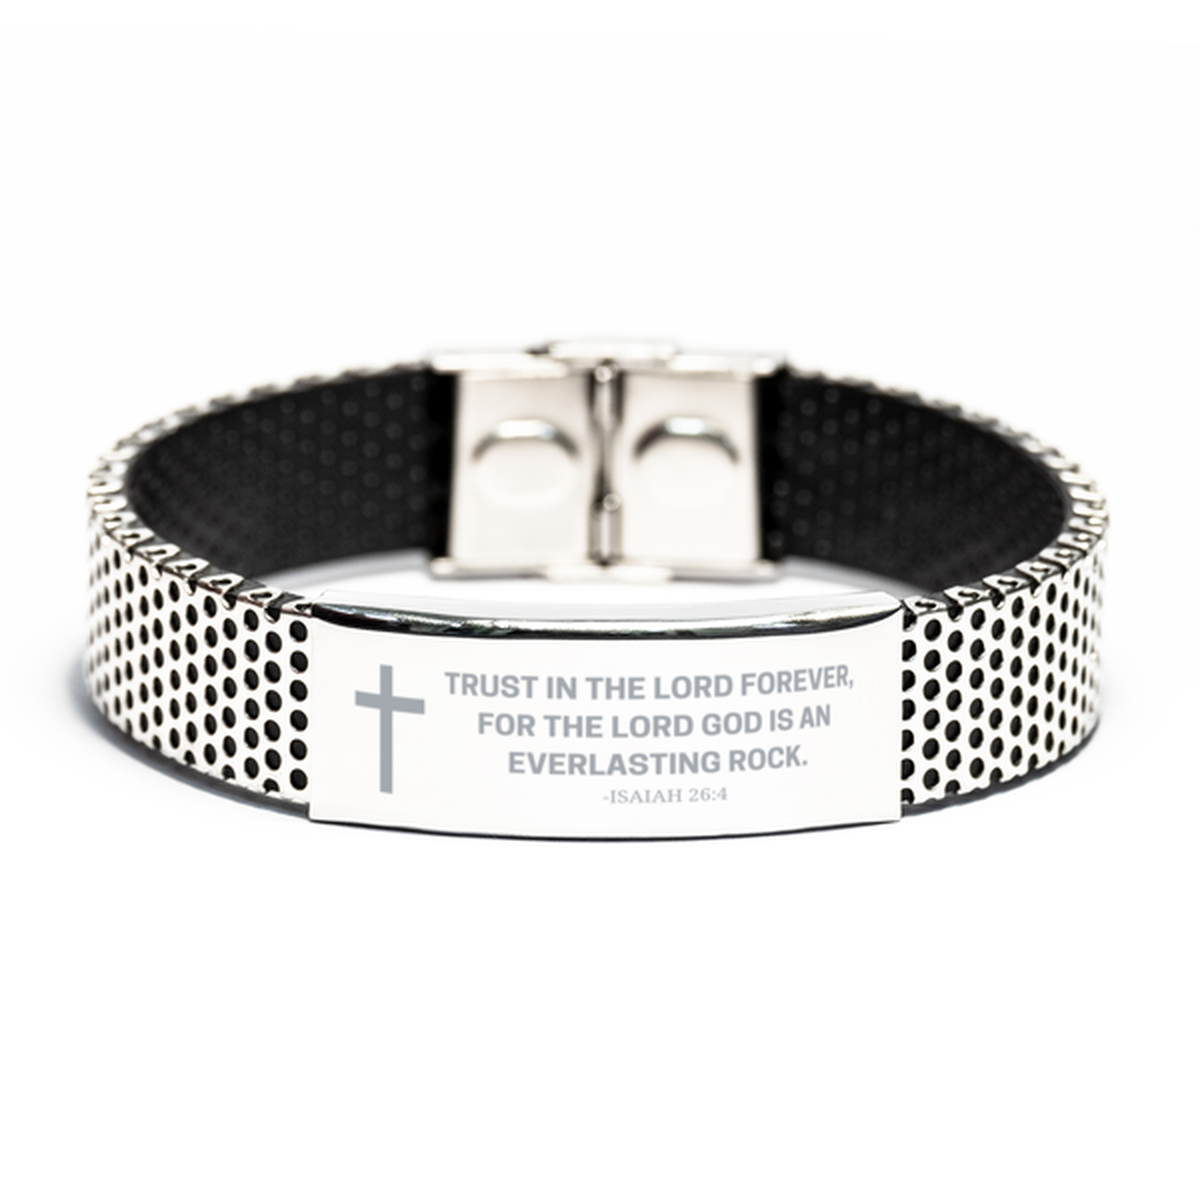 Baptism Gifts For Teenage Boys Girls, Christian Bible Verse Stainless Steel Bracelet, Trust in the Lord forever, Catholic Confirmation Gifts for Son, Godson, Grandson, Nephew